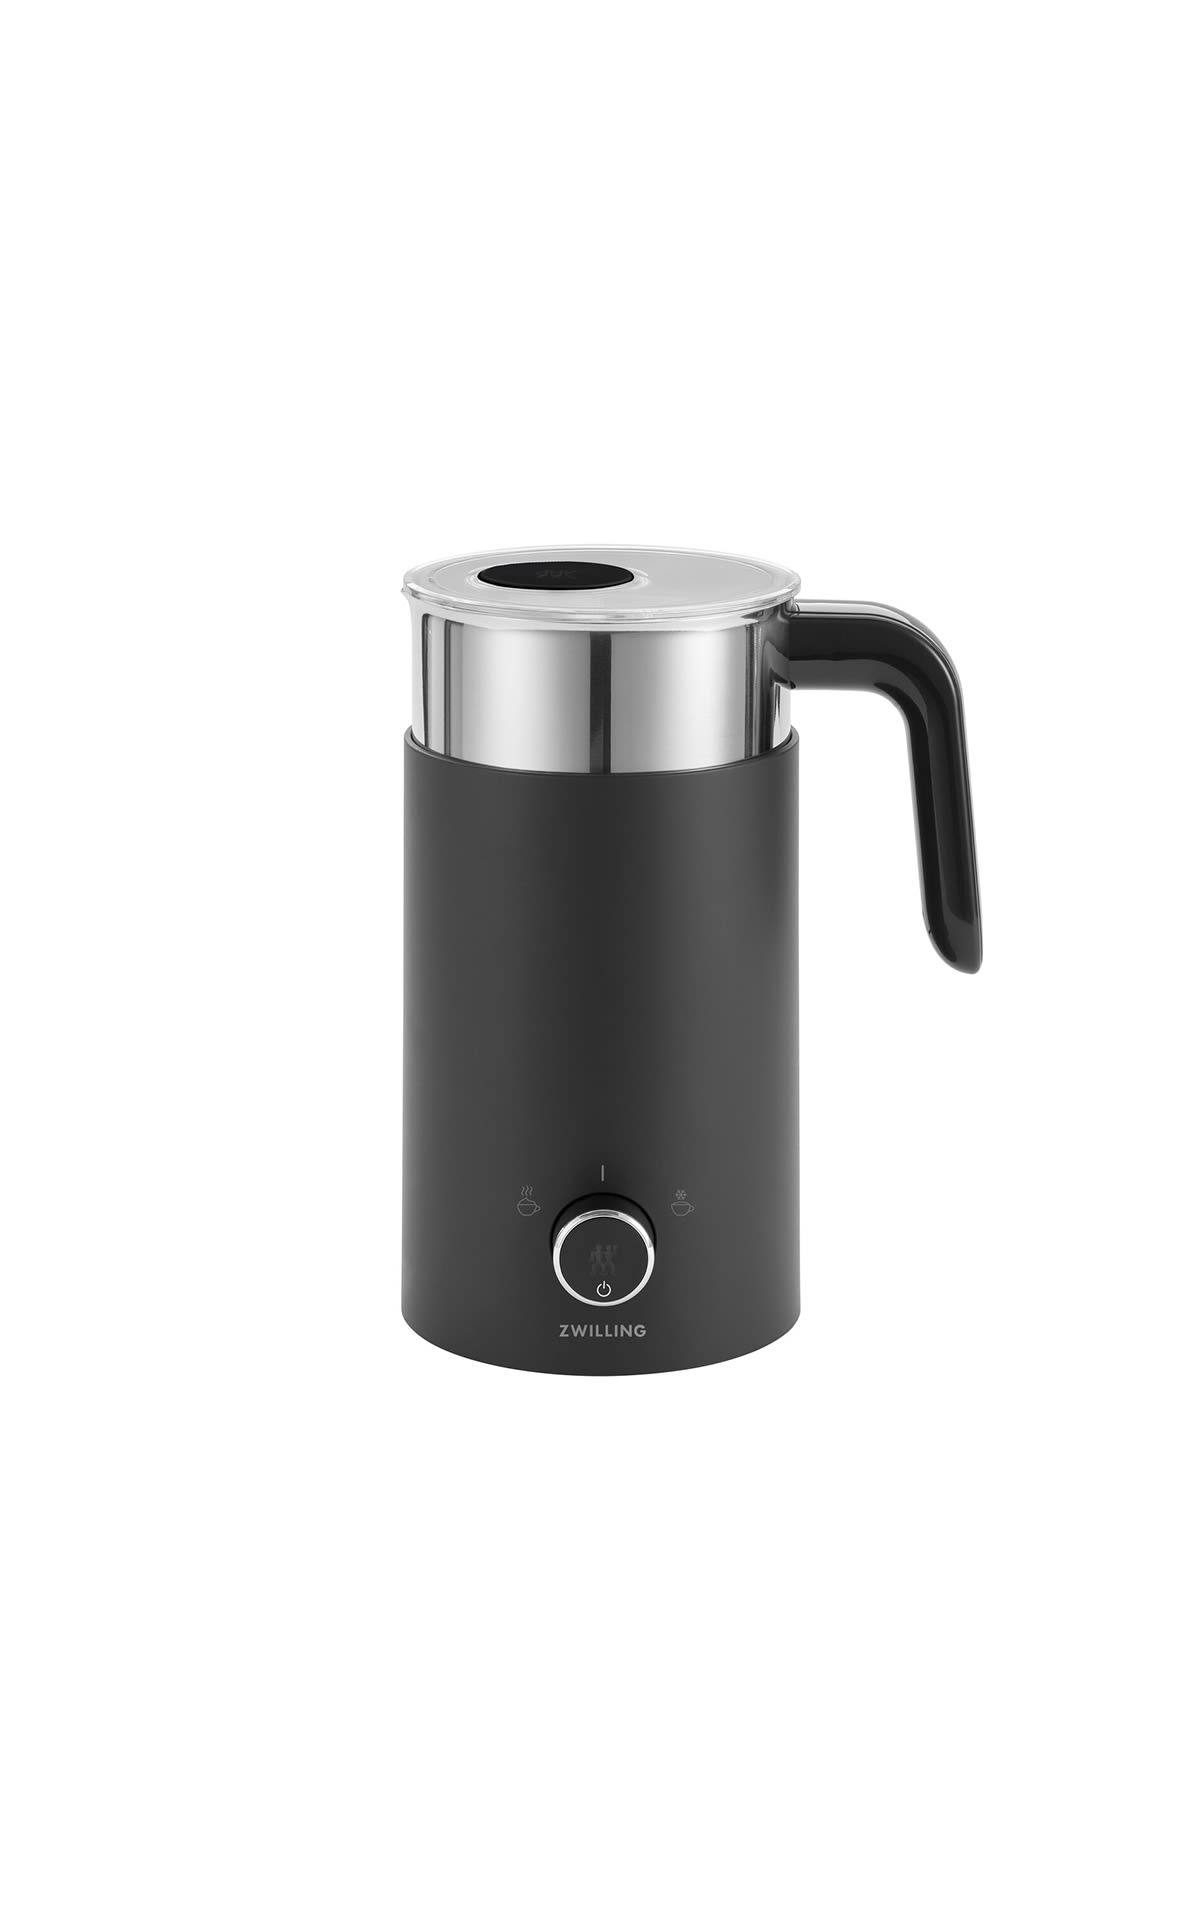 Zwilling Milk frother